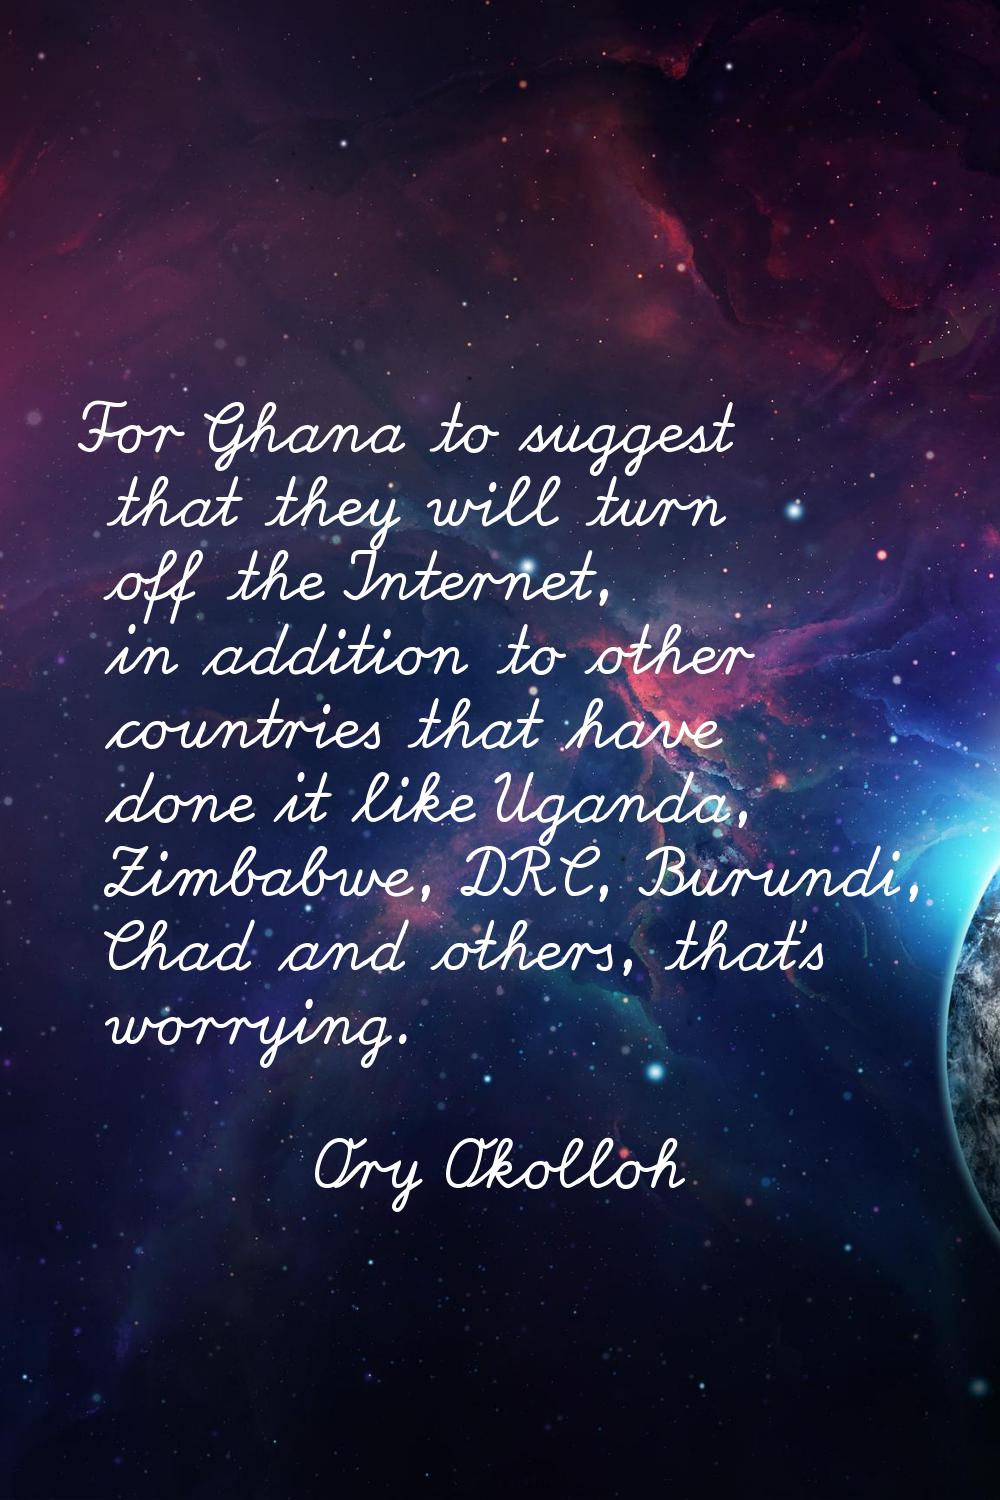 For Ghana to suggest that they will turn off the Internet, in addition to other countries that have